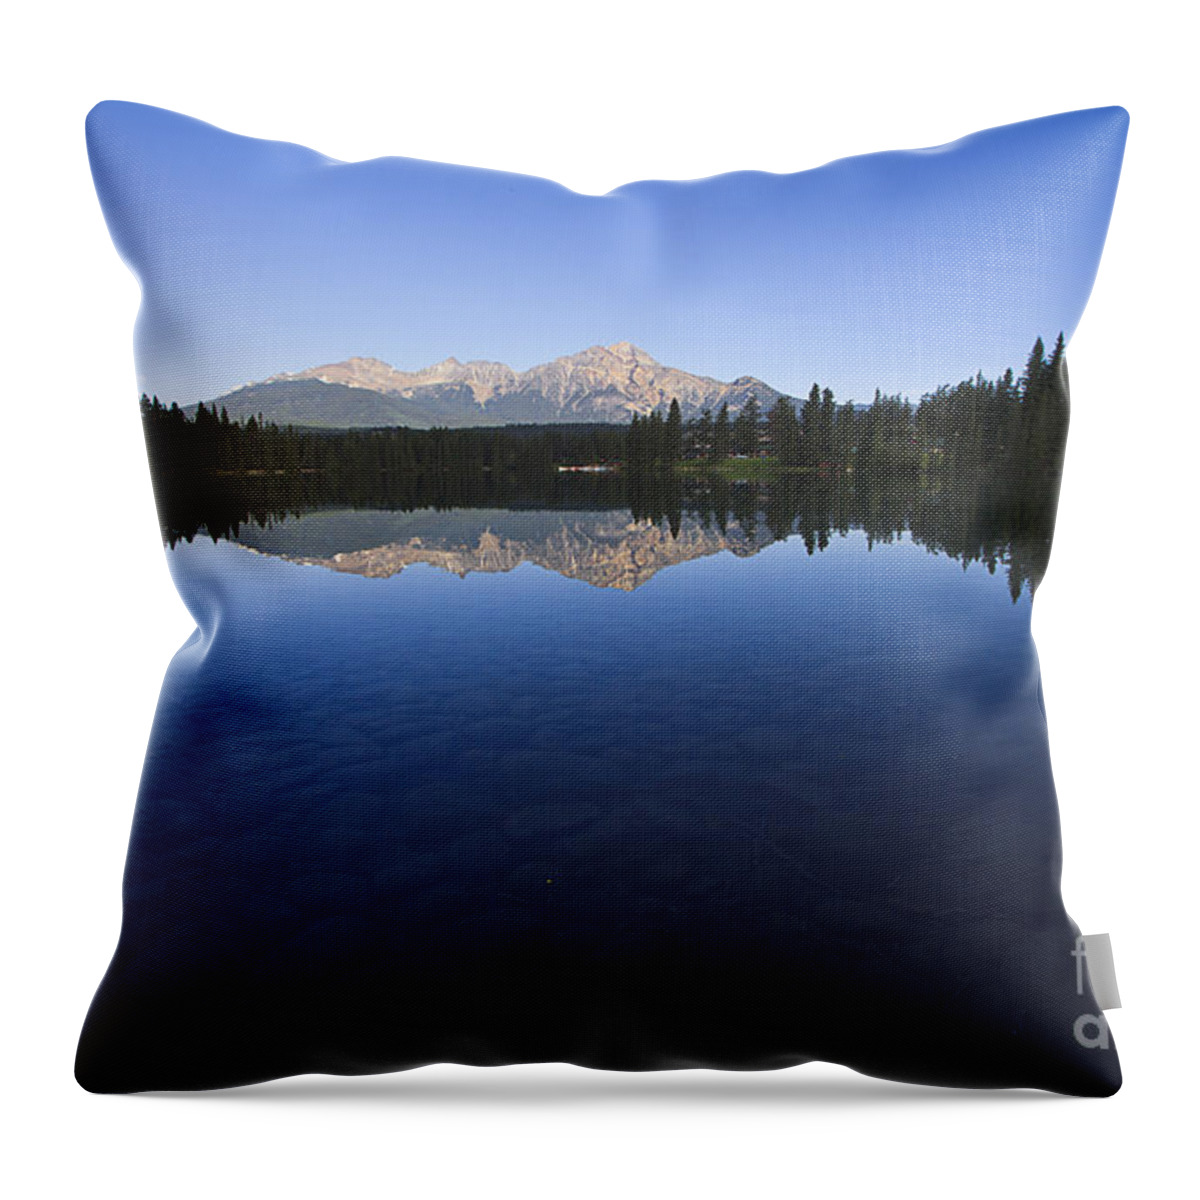 Beauvert Lake Throw Pillow featuring the photograph Beauvert Lake 2 by Dennis Hedberg